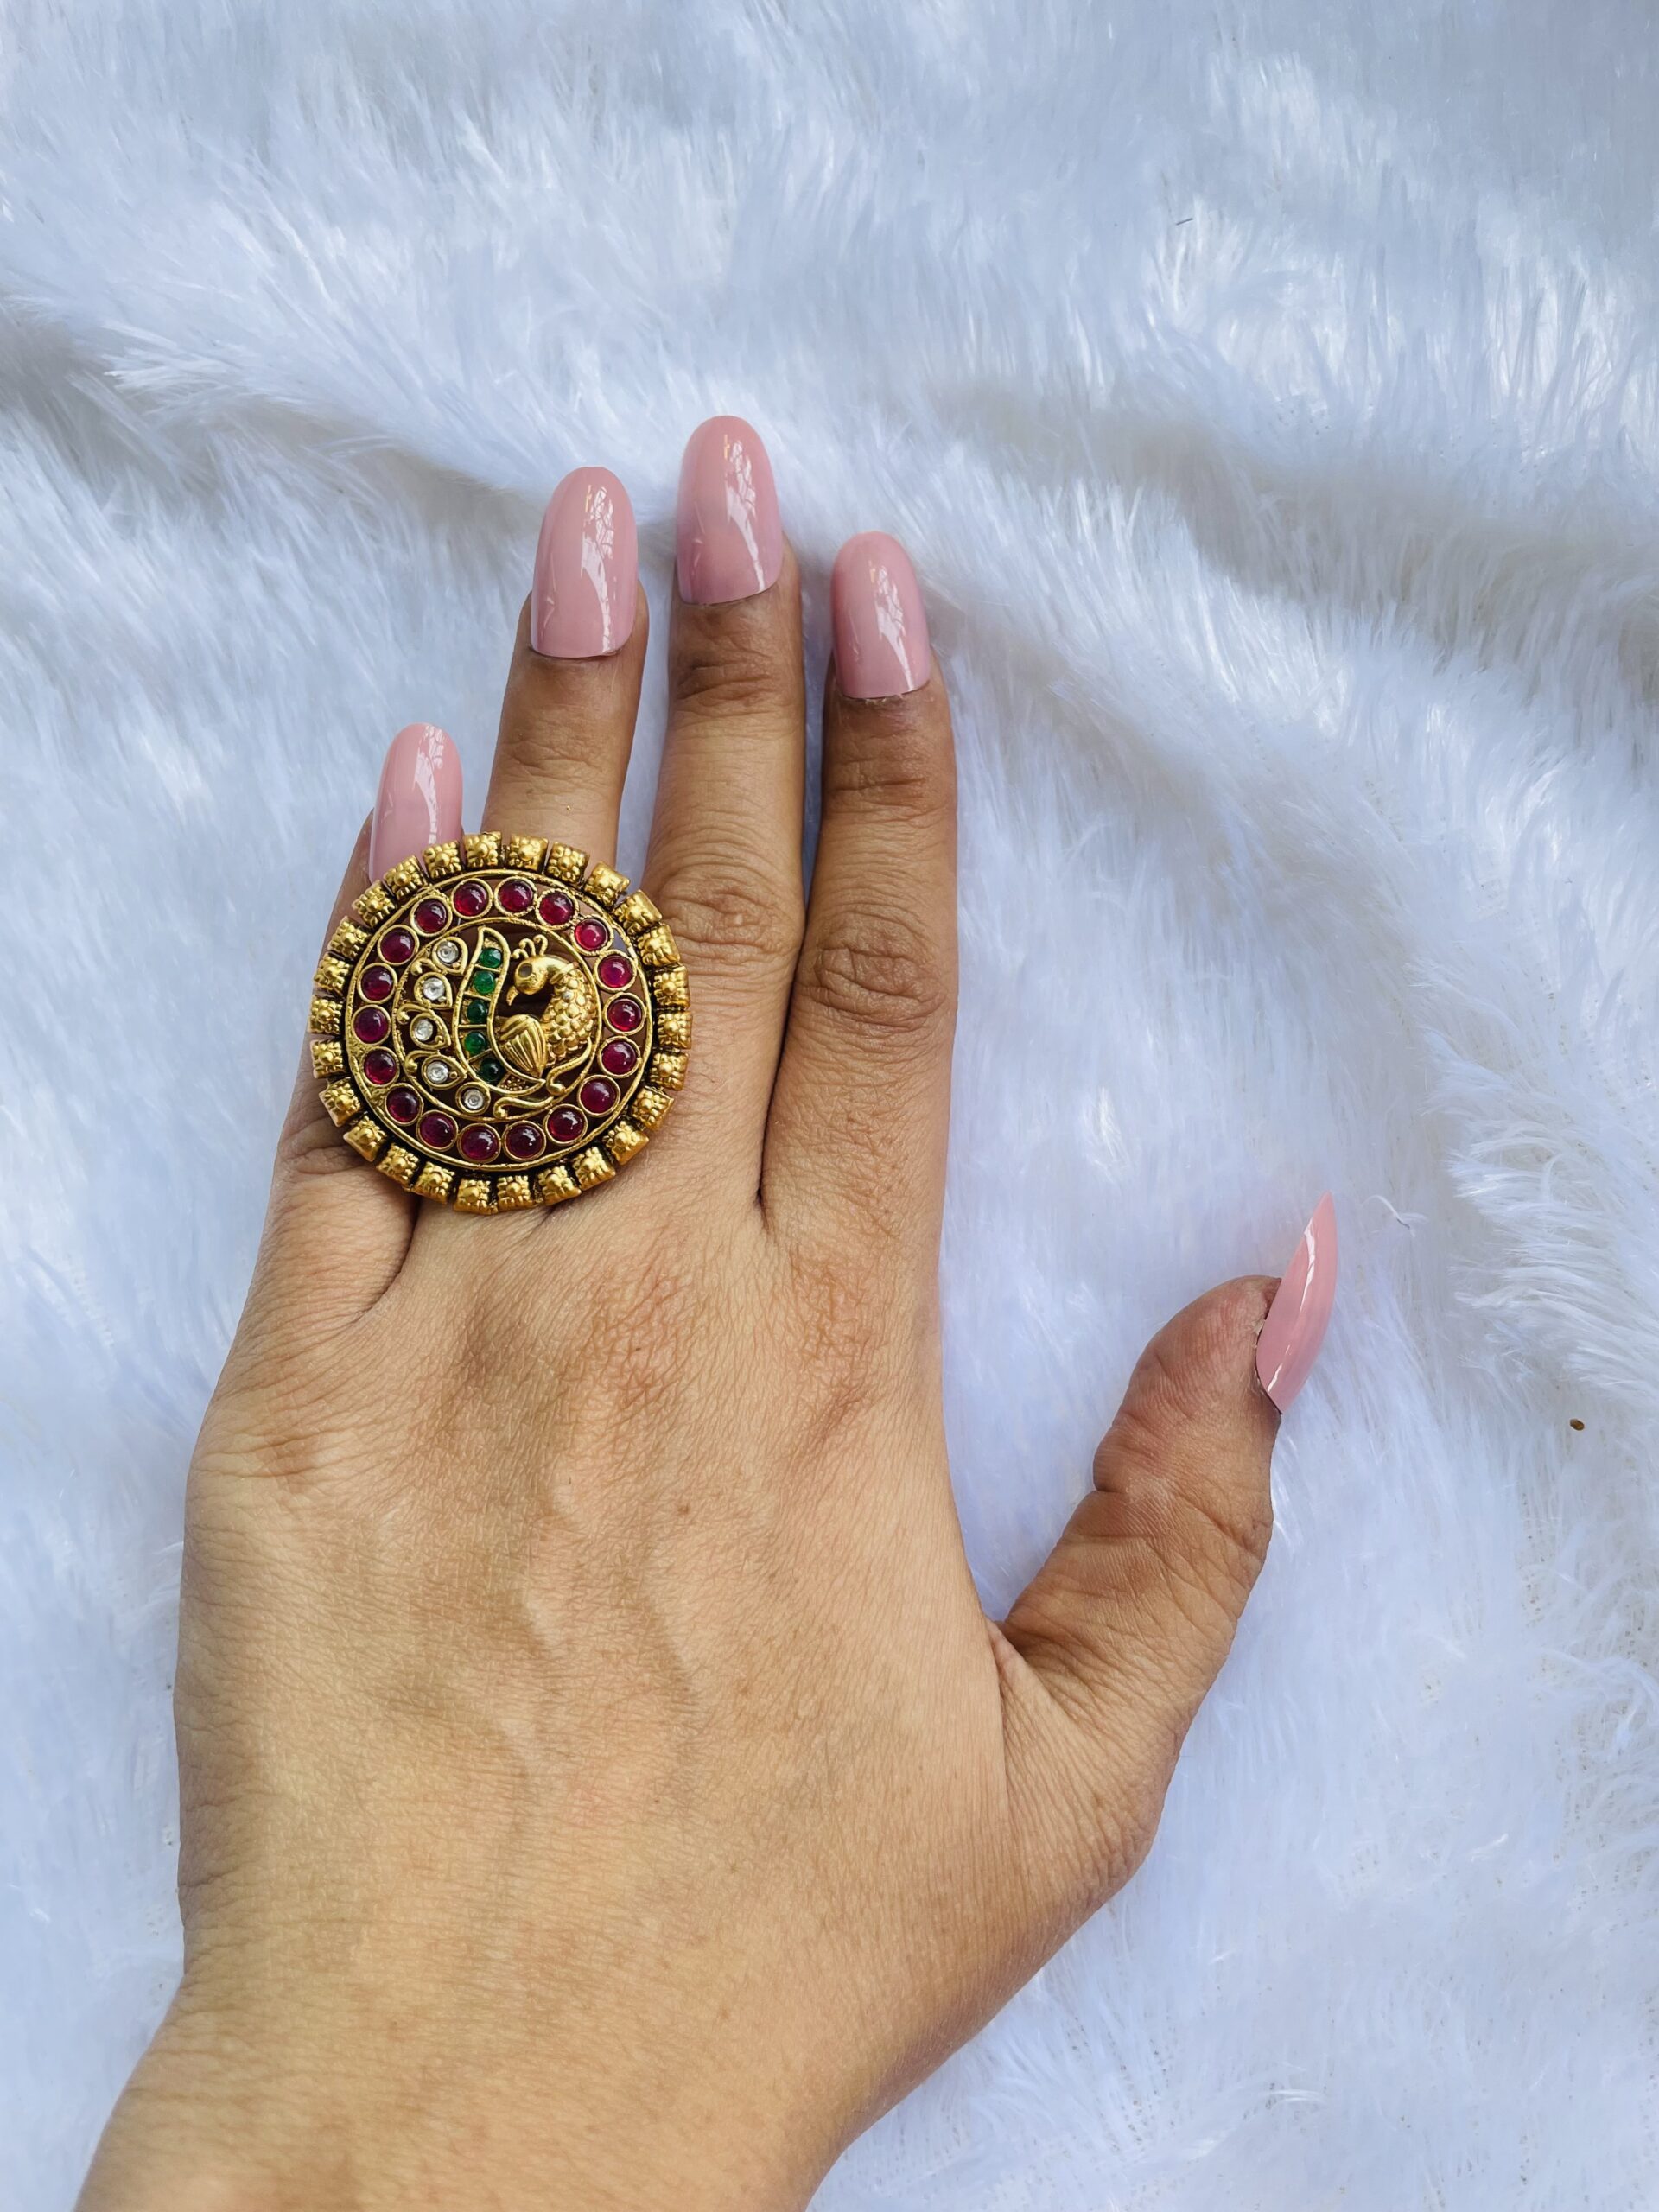 Bollywood Oxidized Silver Plated Light Weight Indian Traditional Adjustable  Statement Big Finger Ring for Women/ Free Shipping World-wide - Etsy